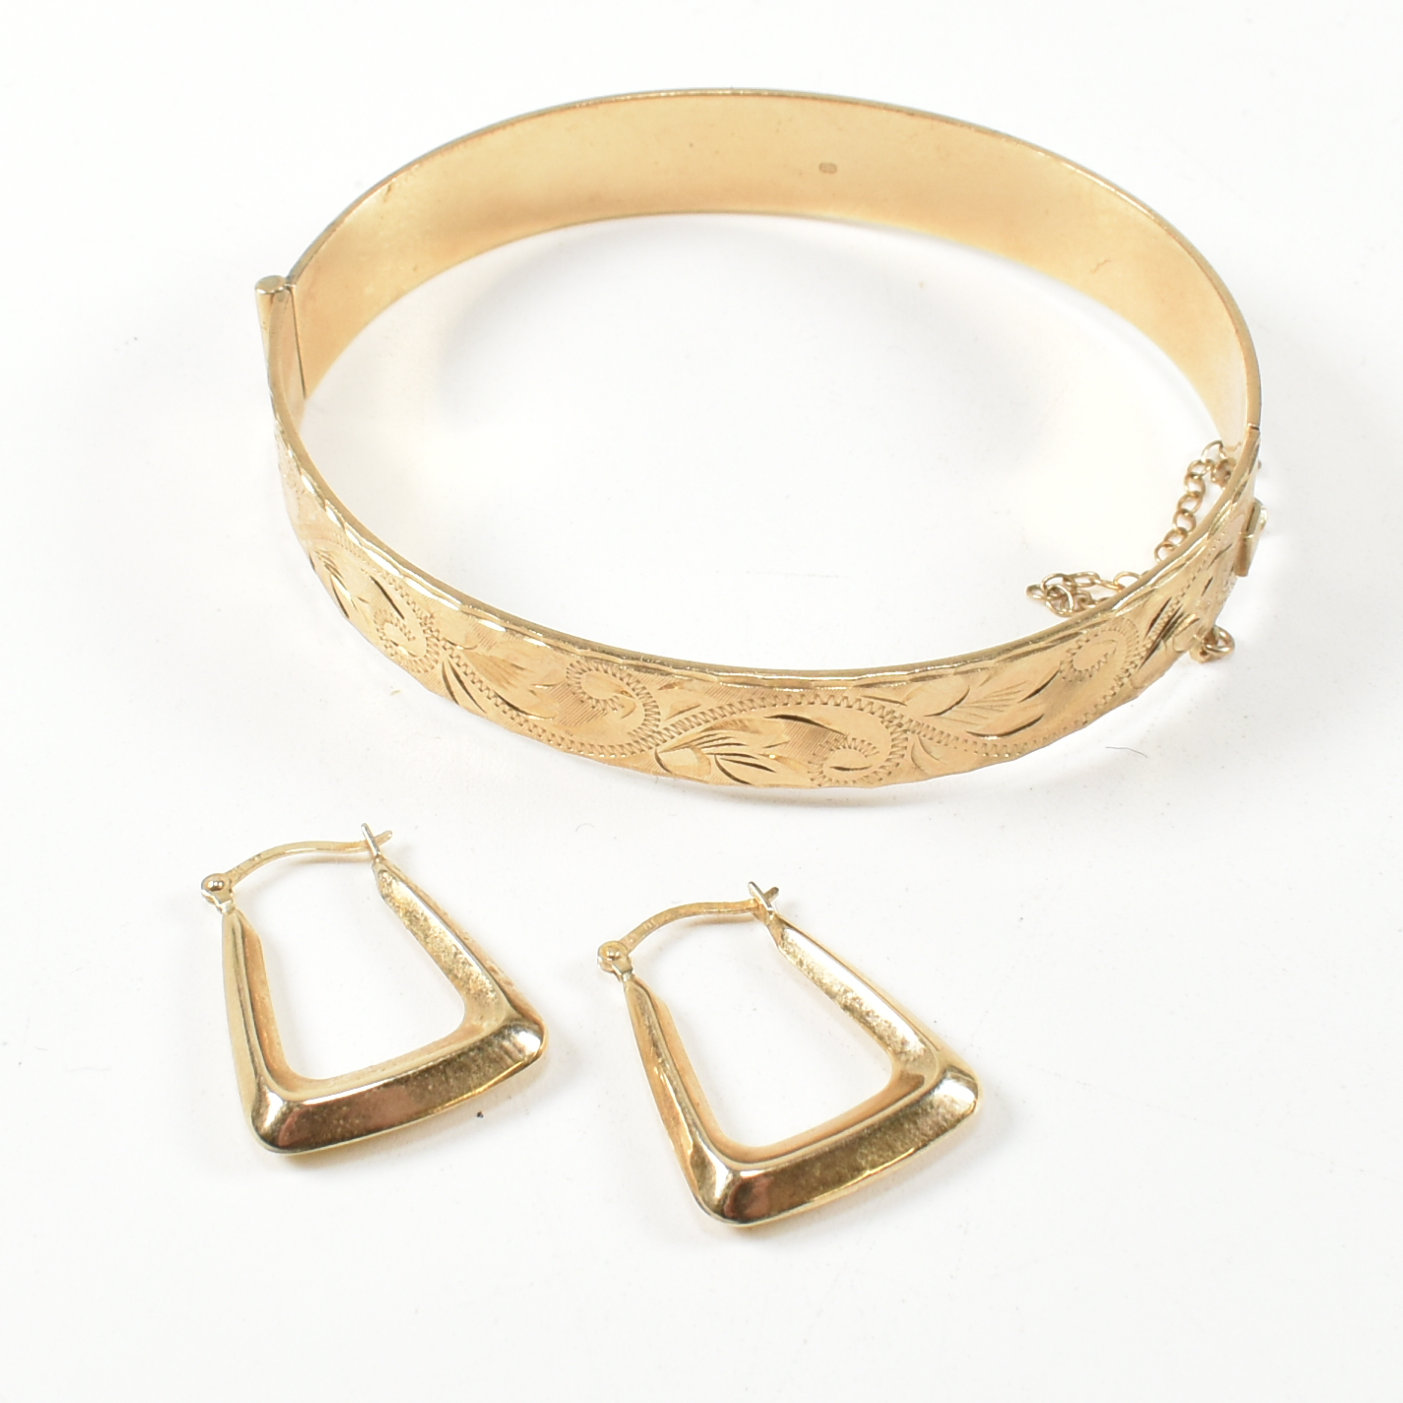 HALLMARKED 9CT GOLD HINGED BANGLE & A PAIR OF 9CT GOLD HOOP EARRINGS